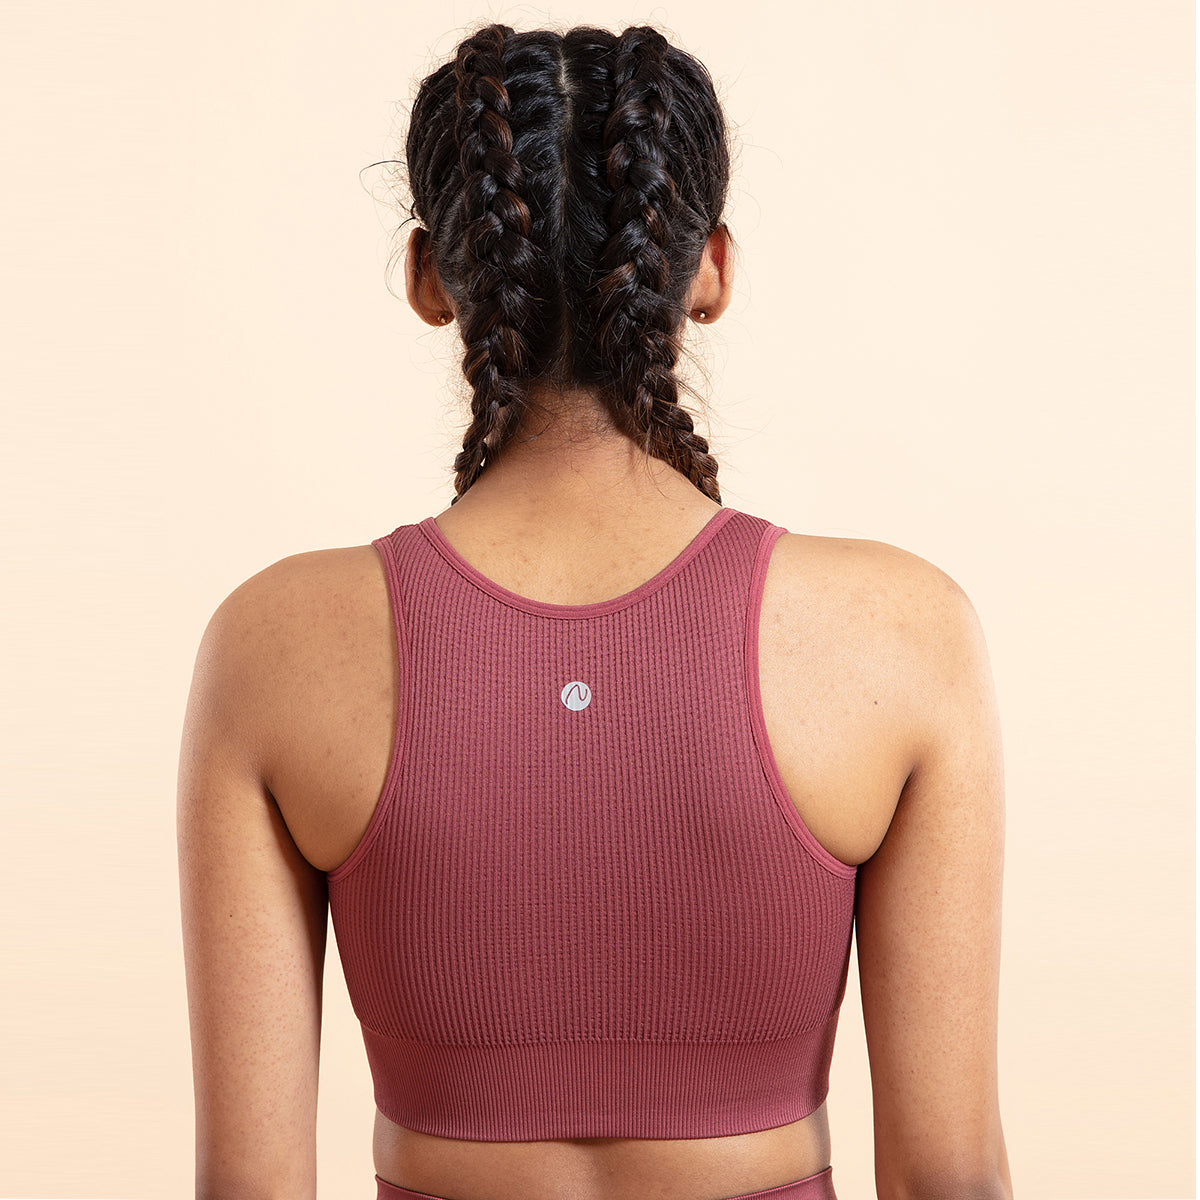 Nykd All Day Seamless Sports Bra with removable cookies-  NYK096 Roan Rogue